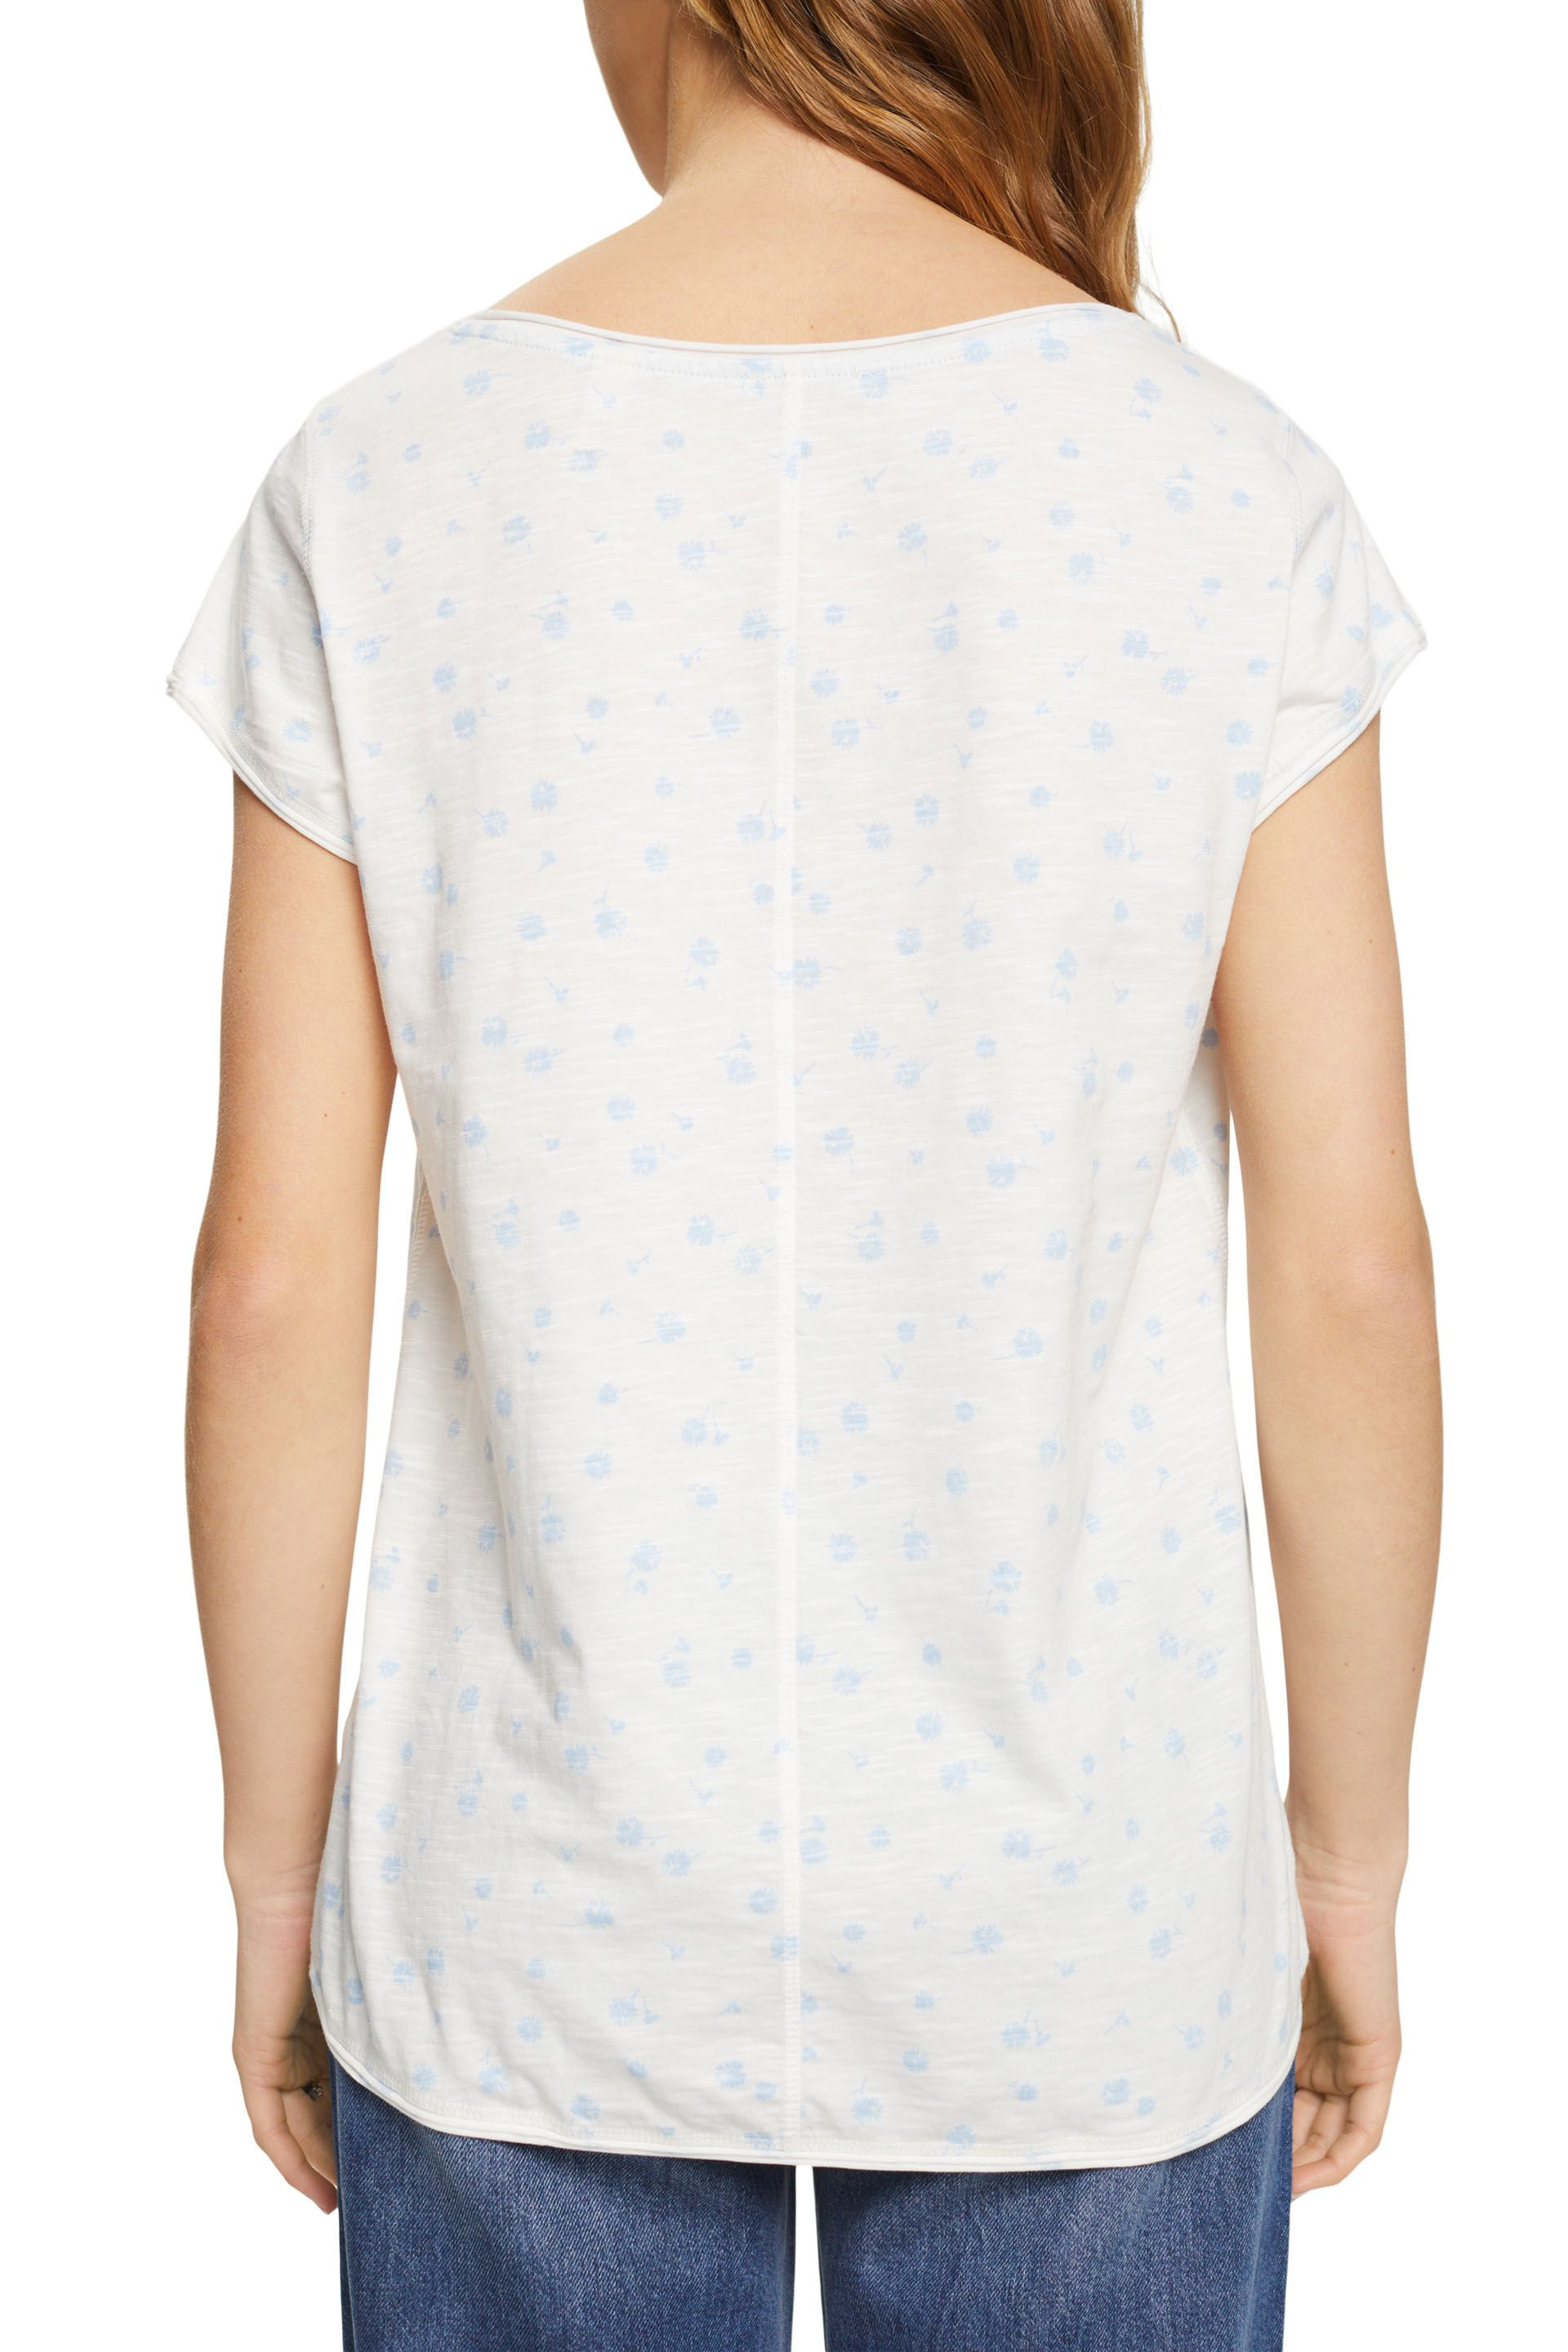 Esprit - T-shirt with print, White, large image number 2